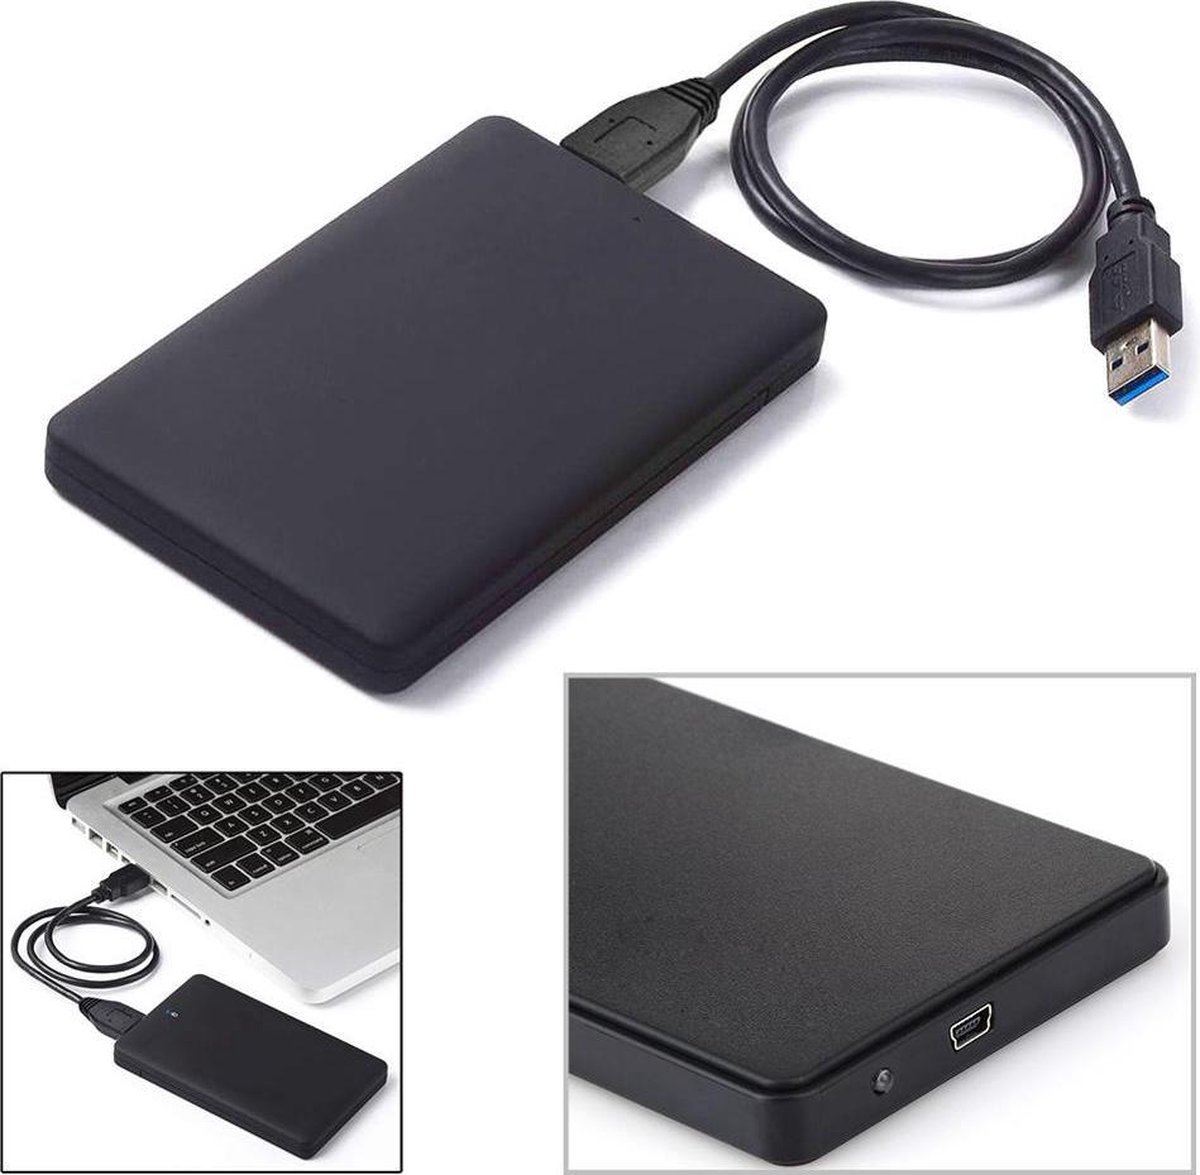 WiseGoods - Premium HDD Behuizing - Draagbare 2.5 Inch HDD Case USB 2.0 - Externe Harde Schijf Met USB Kabel - SDD